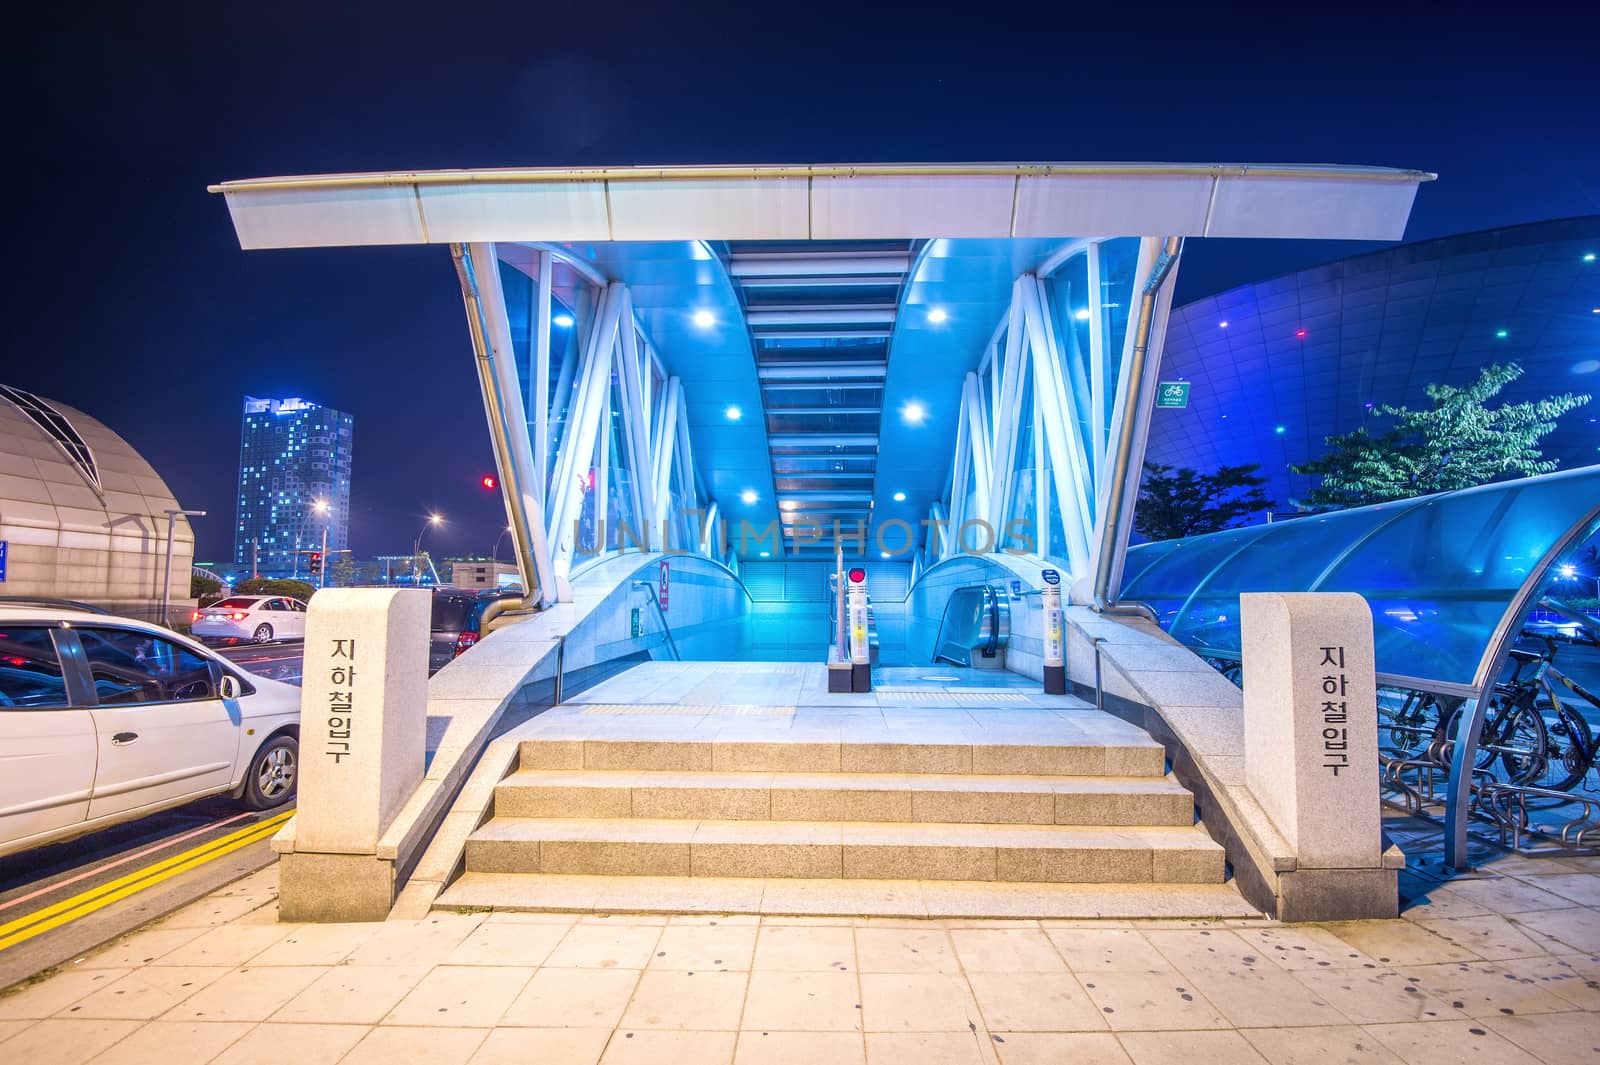 Entrance to metro station in Central park, Incheon. by gutarphotoghaphy